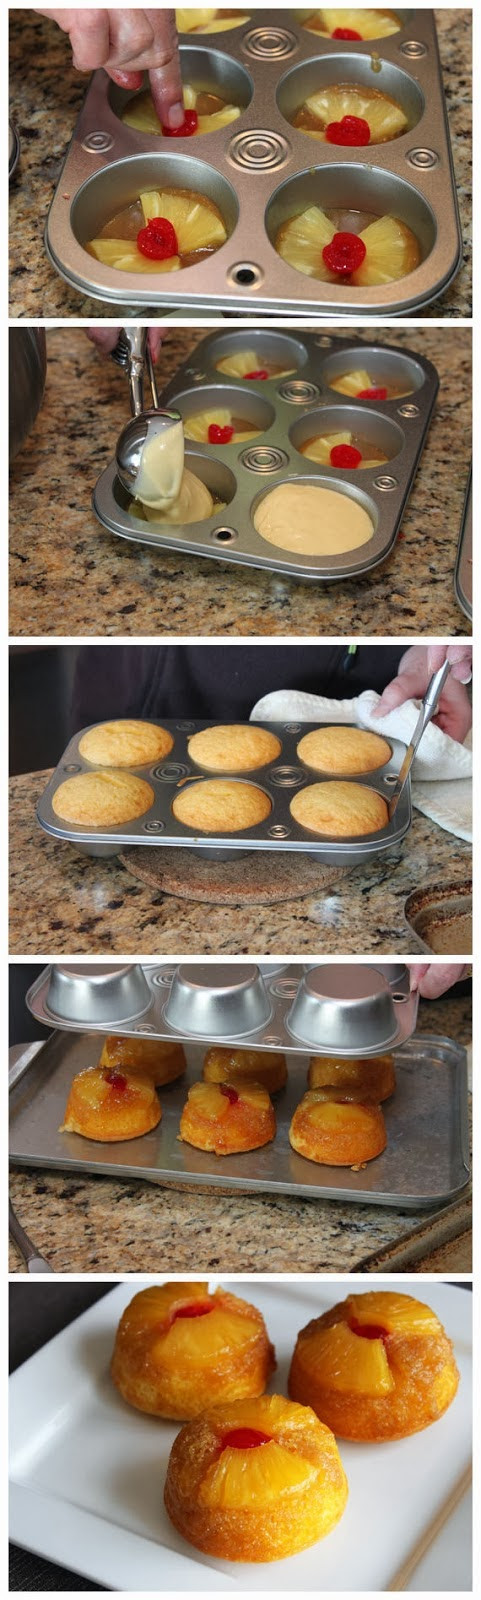 Pineapple Upside Down Cake Using Cake Mix And Crushed Pineapple
 How Ho Pineapple Upside Down Cupcakes